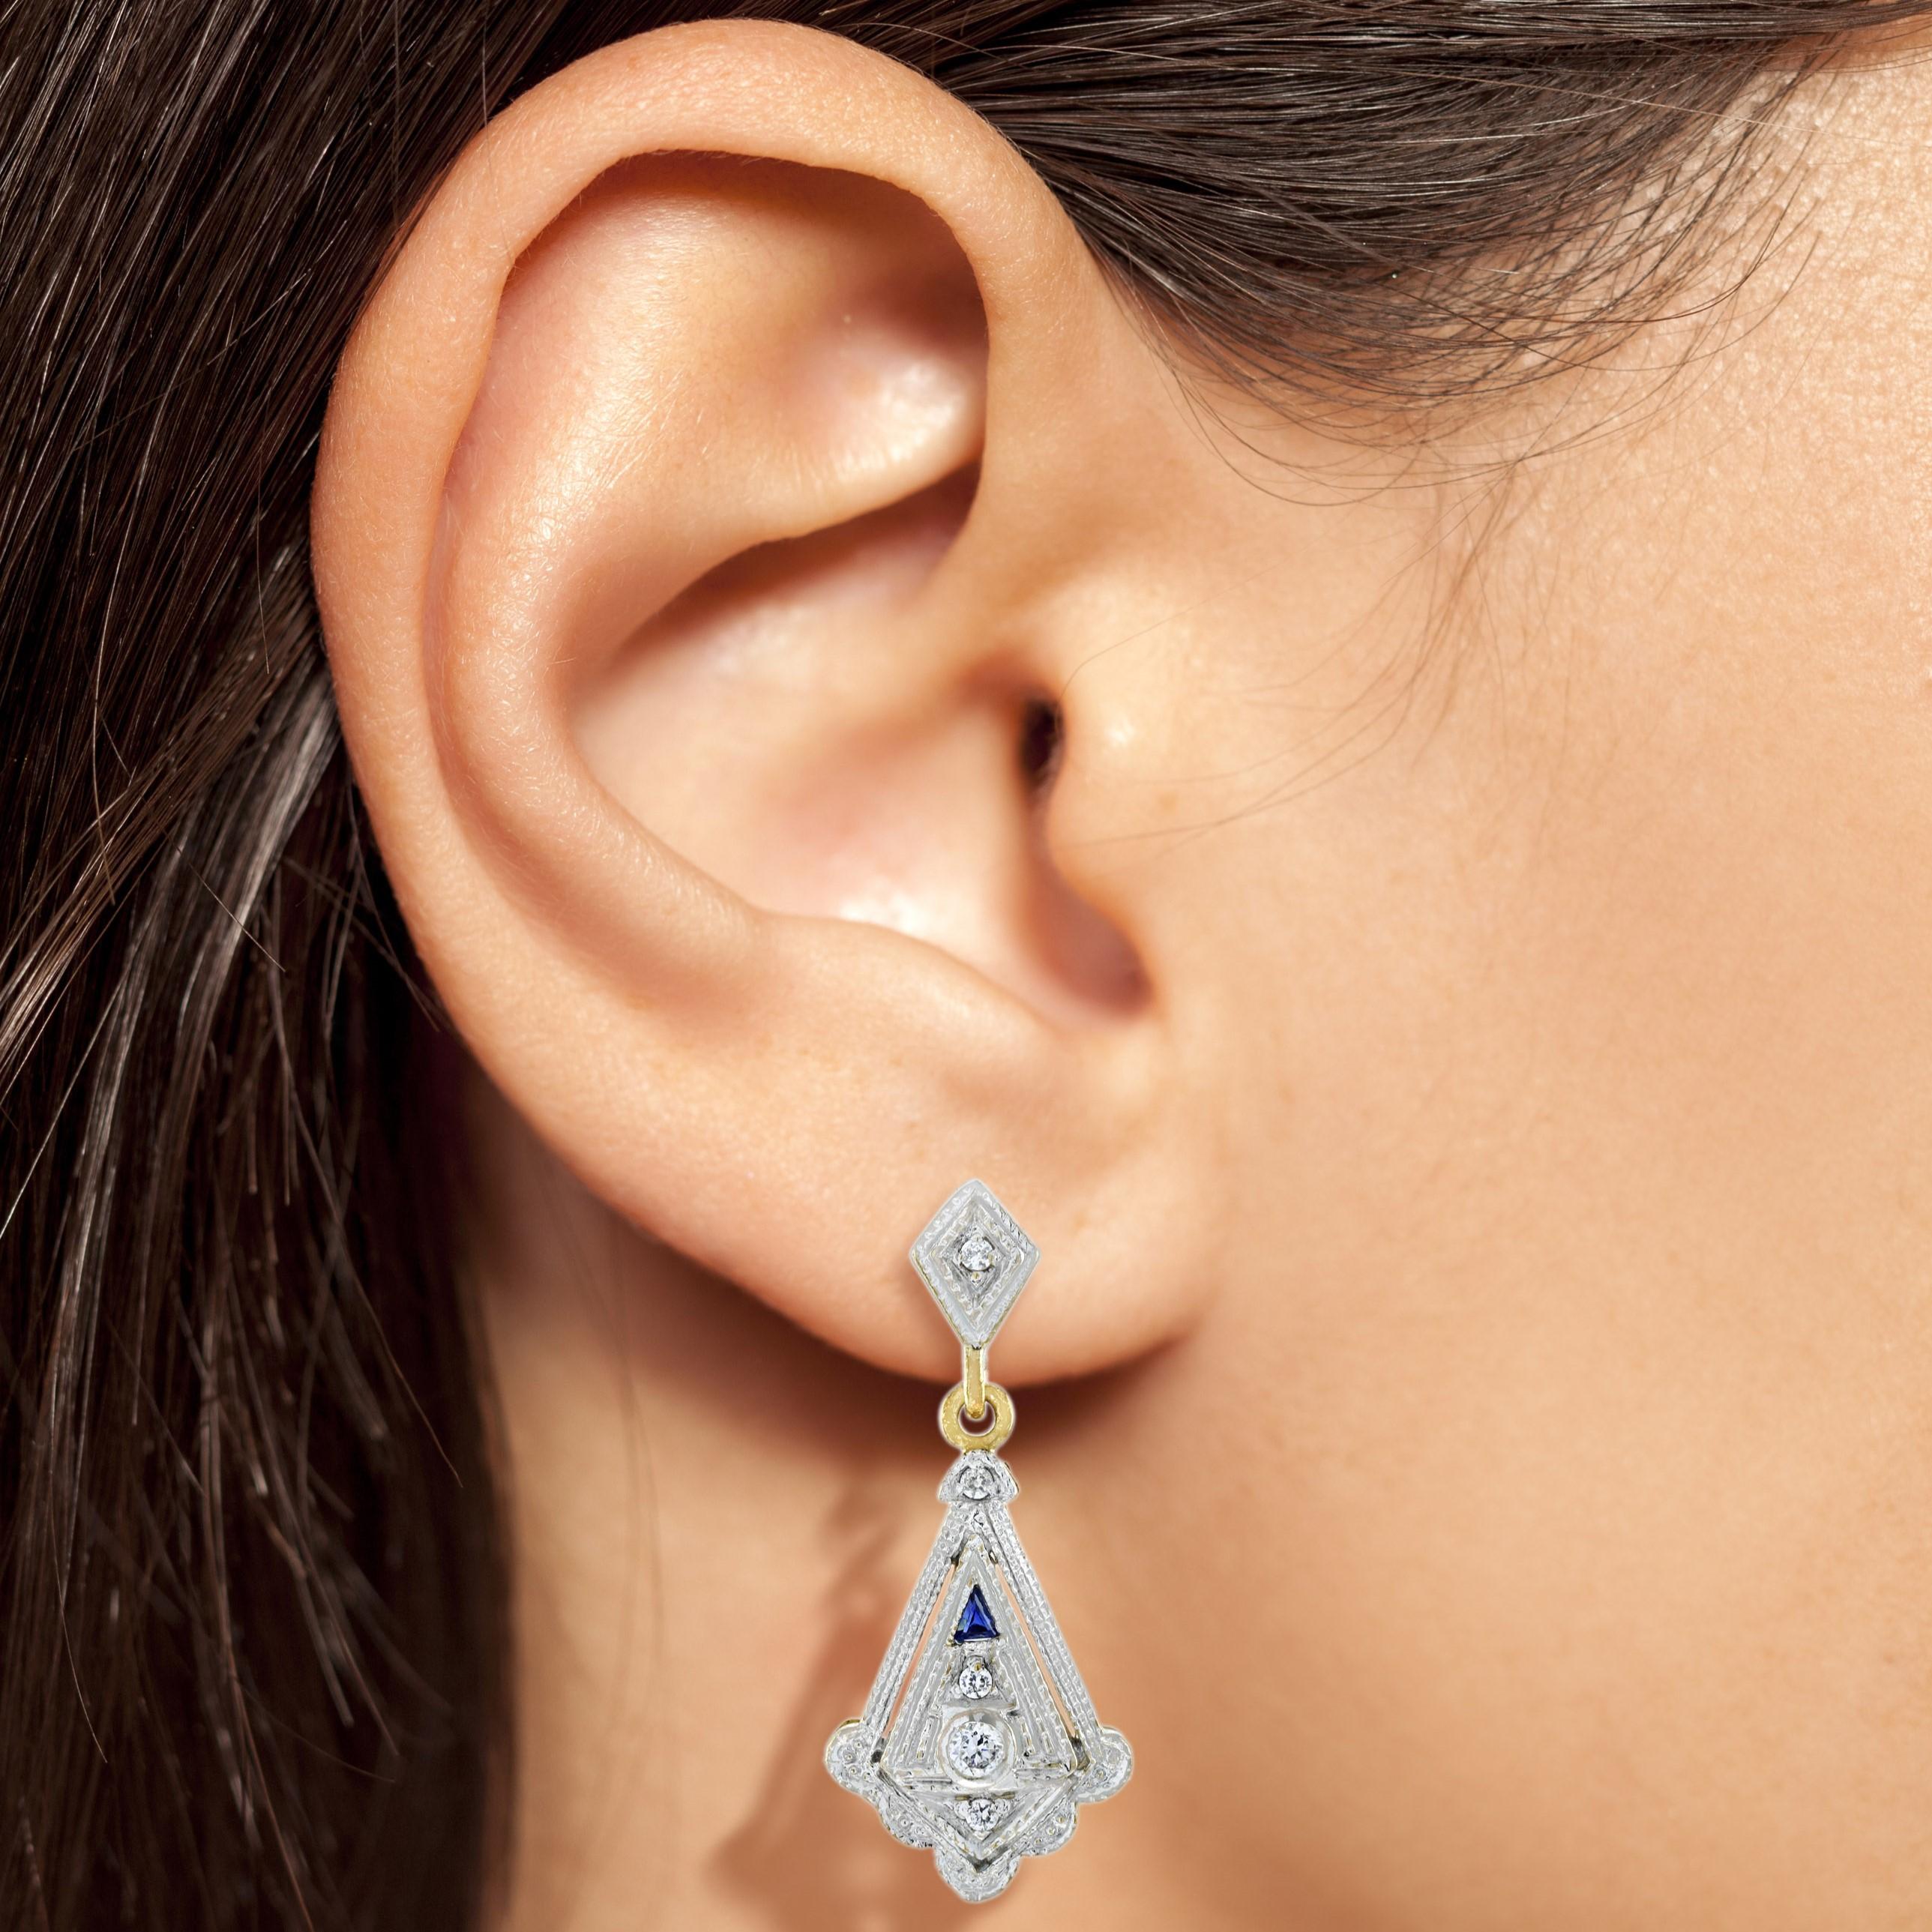 These lovely vintage style Art Deco diamond and sapphire earrings are hand crafted in 14k two tone gold setting. Angular diamond set teardrop shapes  dangle from the diamond ear posts, with 0.36 carats total of shimmering round brilliant cut